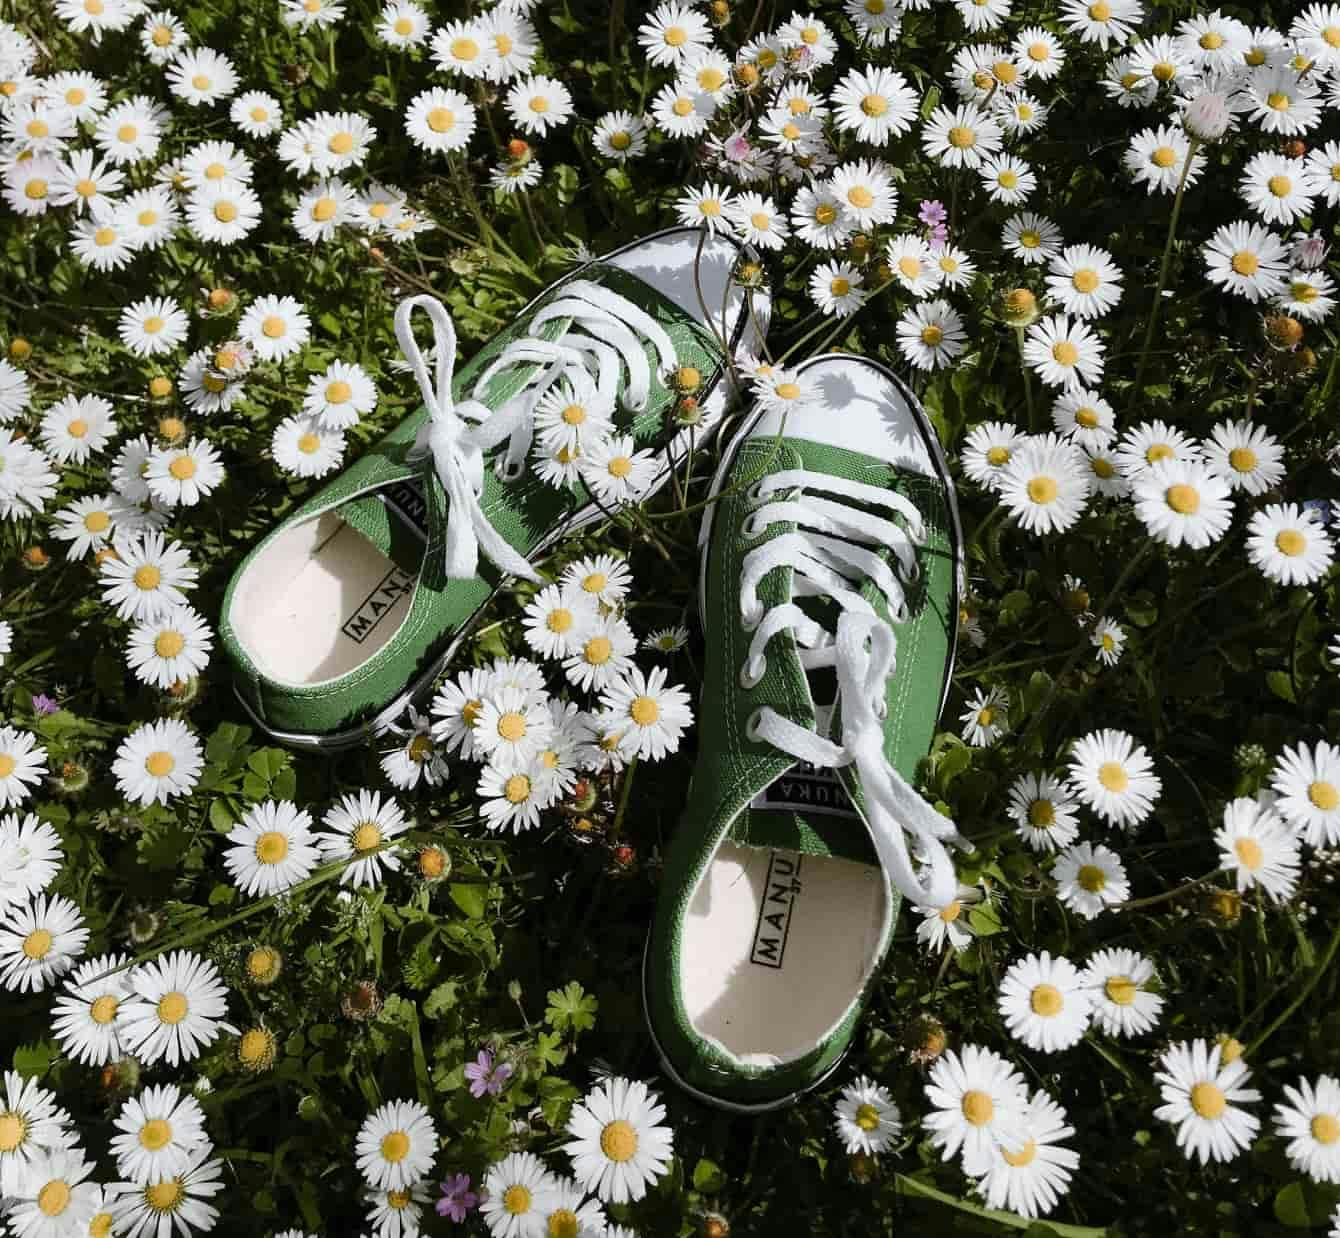 Shoes in a garden of flowers